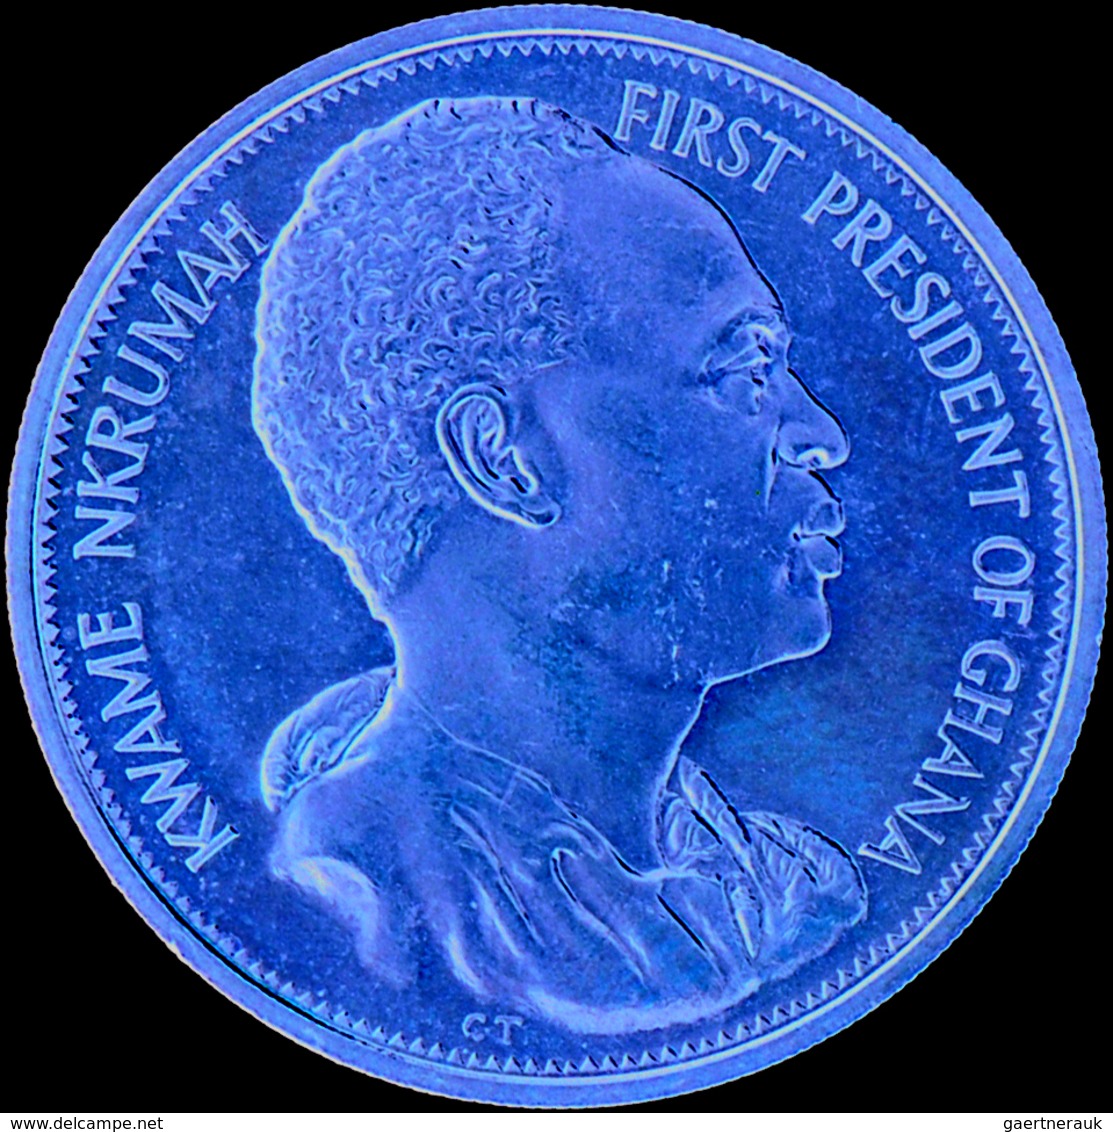 Ghana - Anlagegold: 2 Pfund 1960 (Goldmedaille), Republic Day 1st July 1960, Kwame Nkrumah First Pre - Ghana